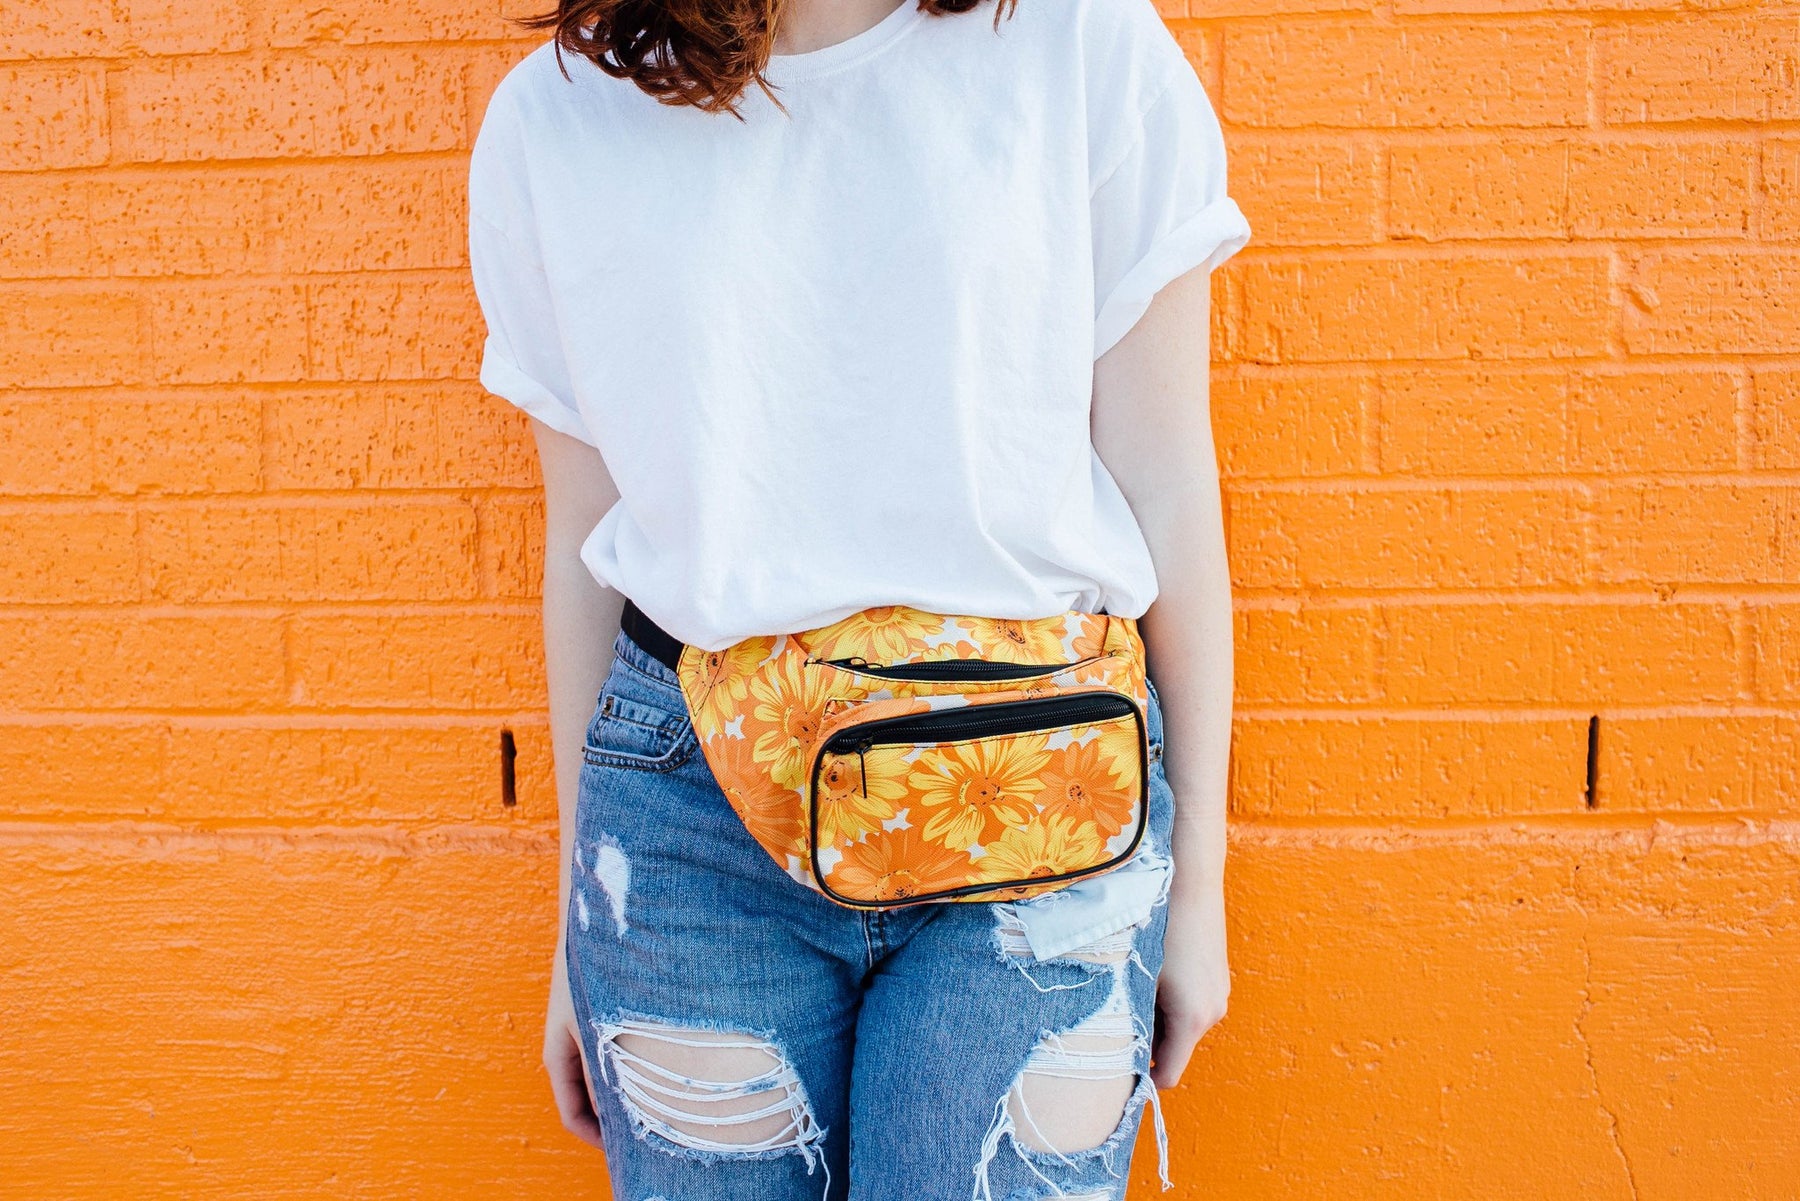 Fanny Pack Floral Sunflower Fanny Pack (Yellow / Orange) - SoJourner Bags